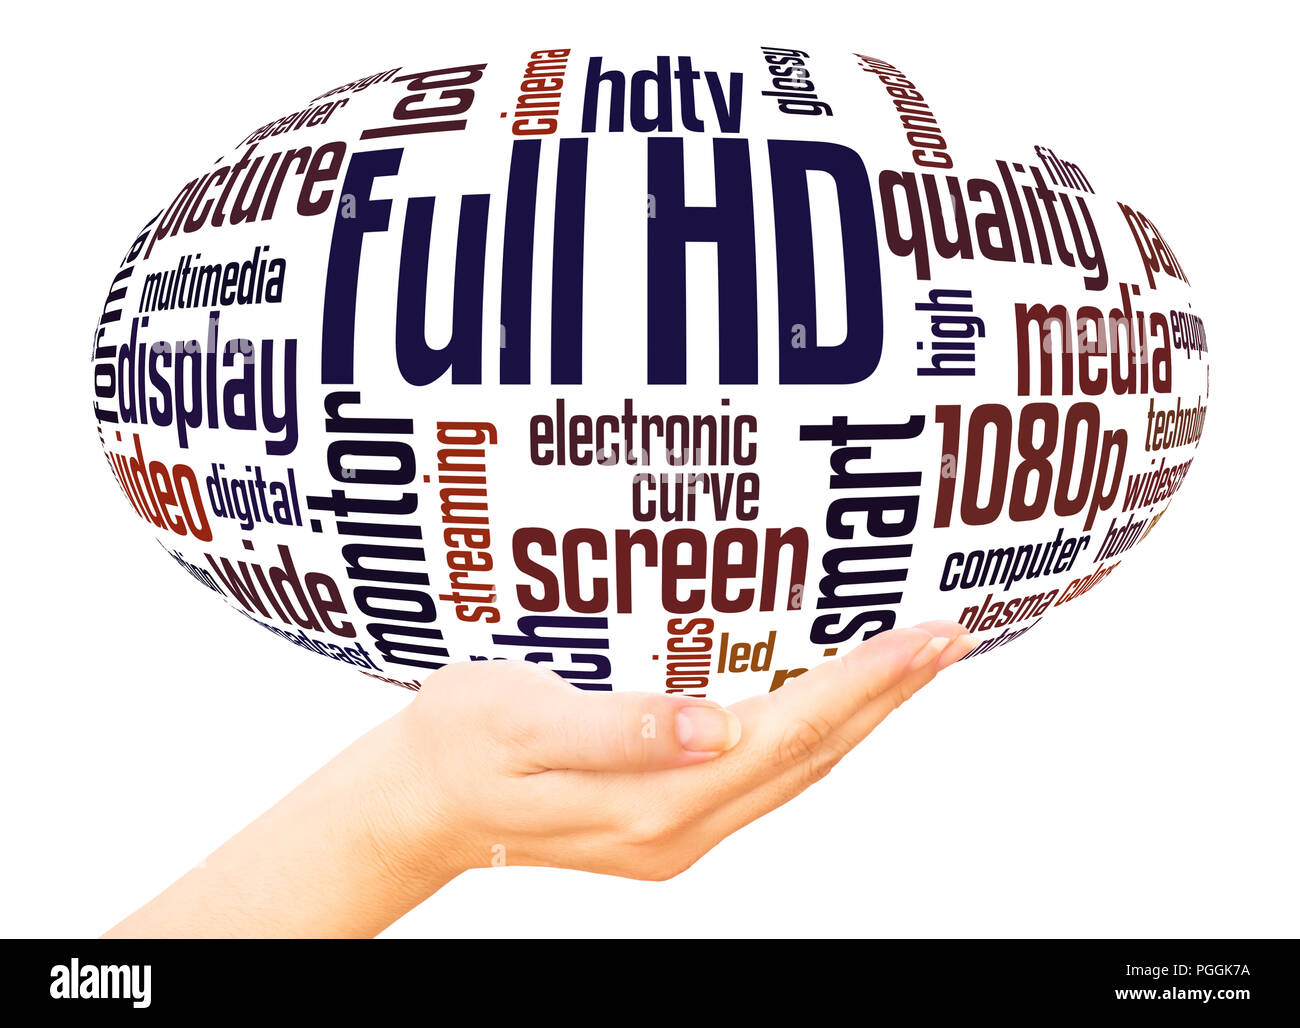 Full HD word cloud sphere concept on white background. Stock Photo